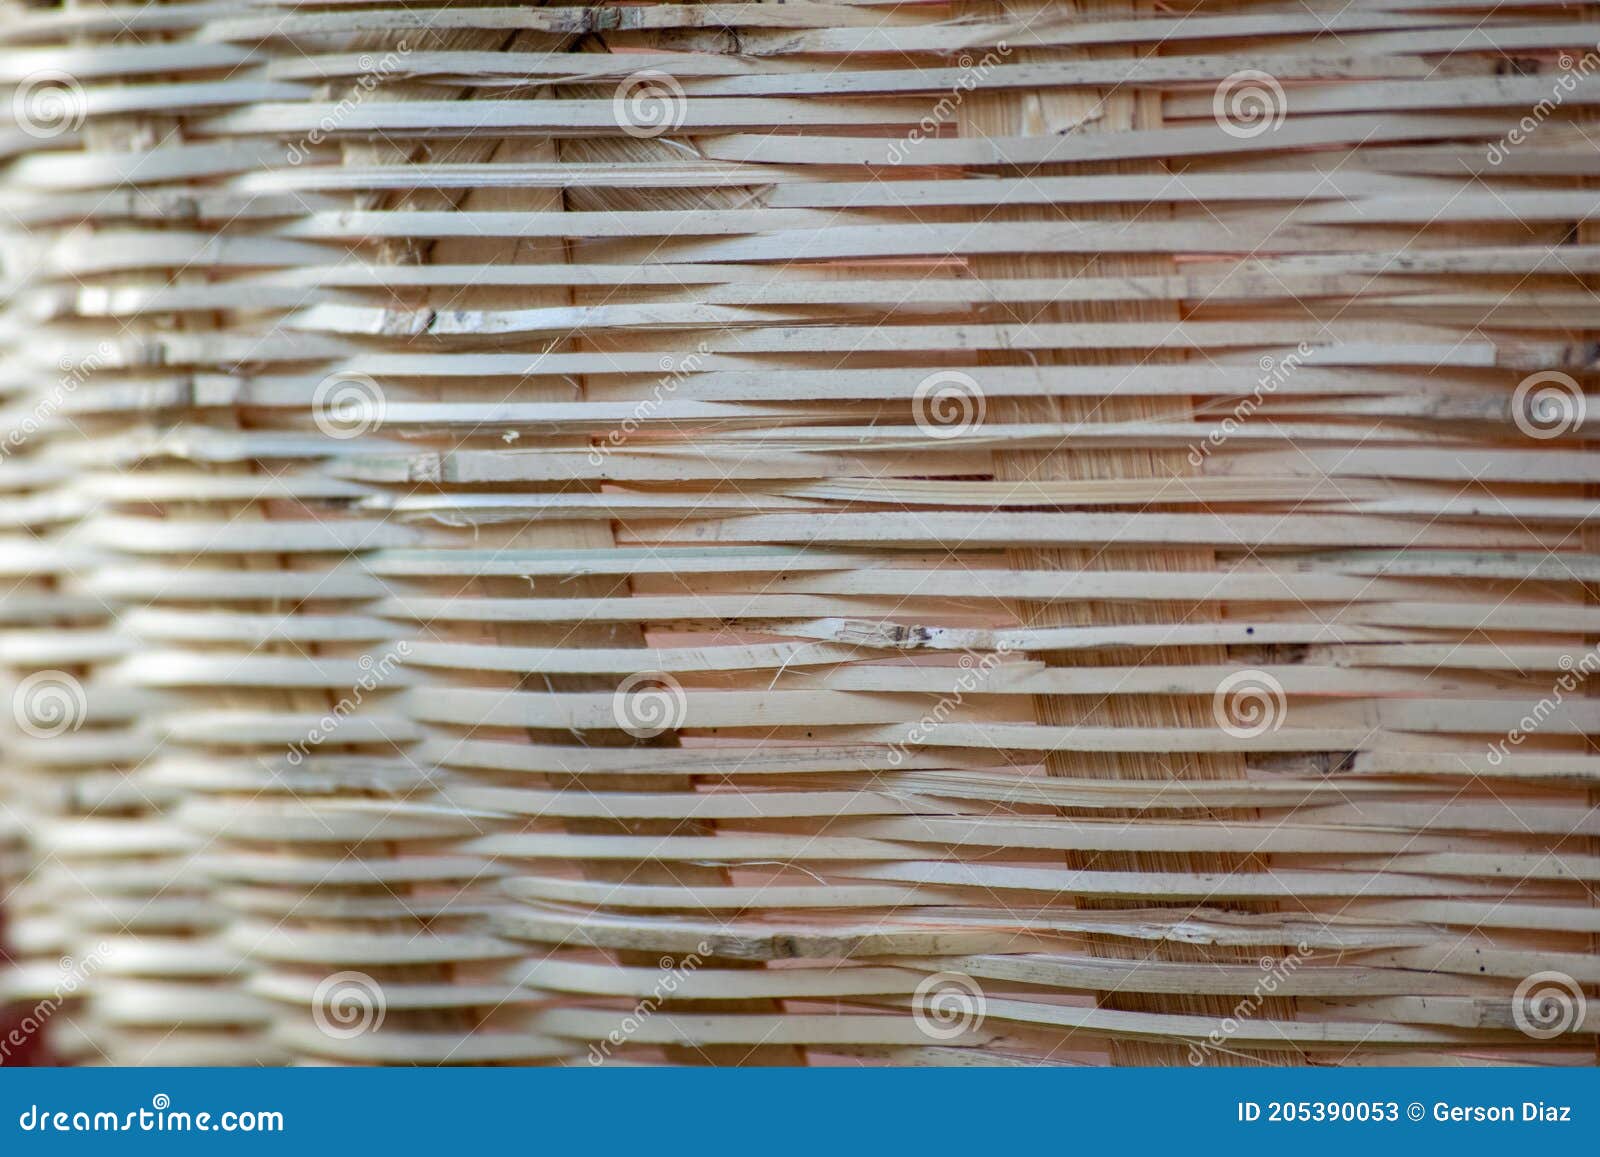 texture of the side of a basket